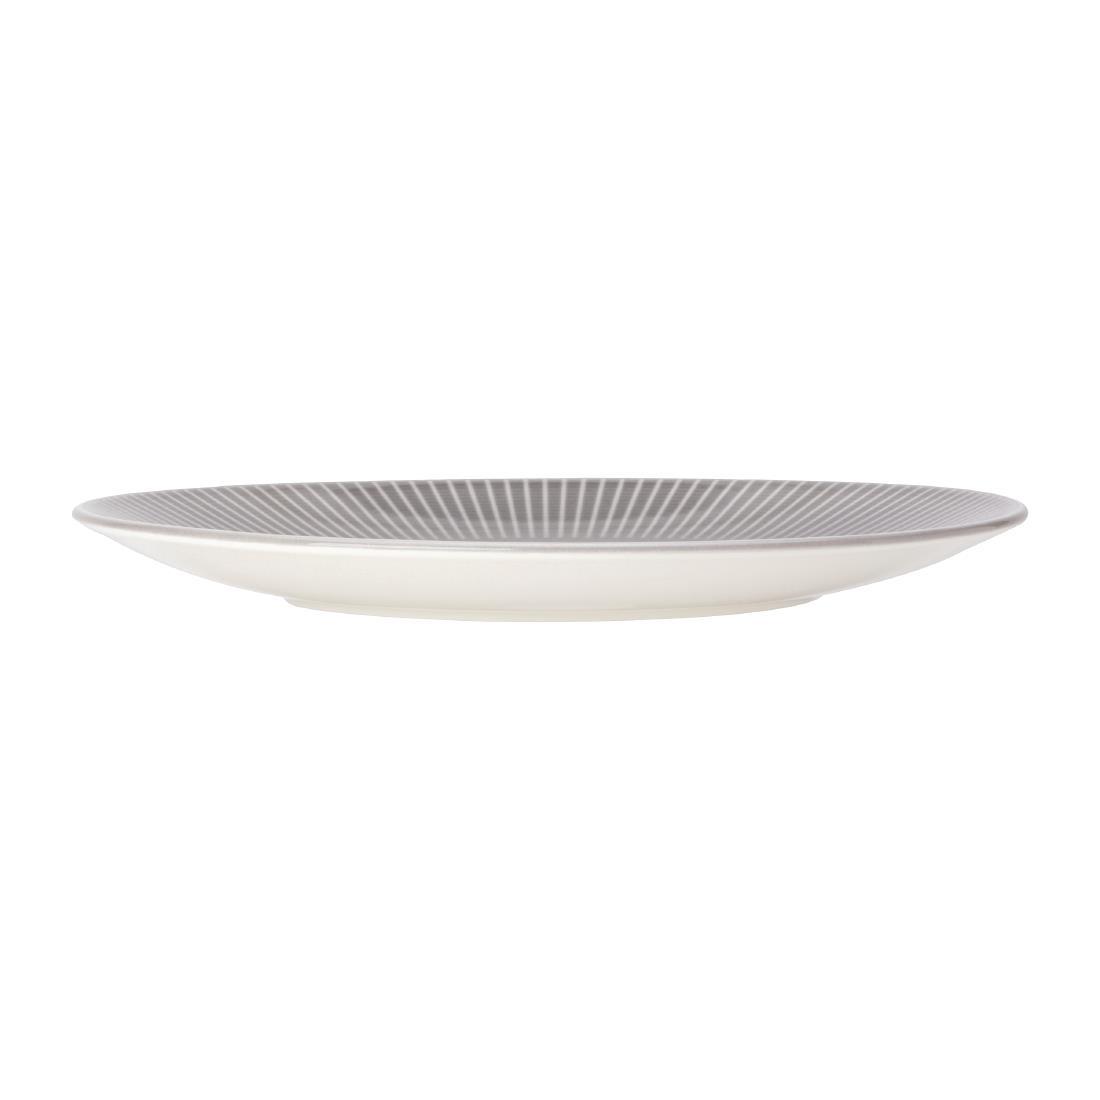 Steelite Willow Mist Gourmet Coupe Plates Grey 280mm (Pack of 6) - VV1796  - 2